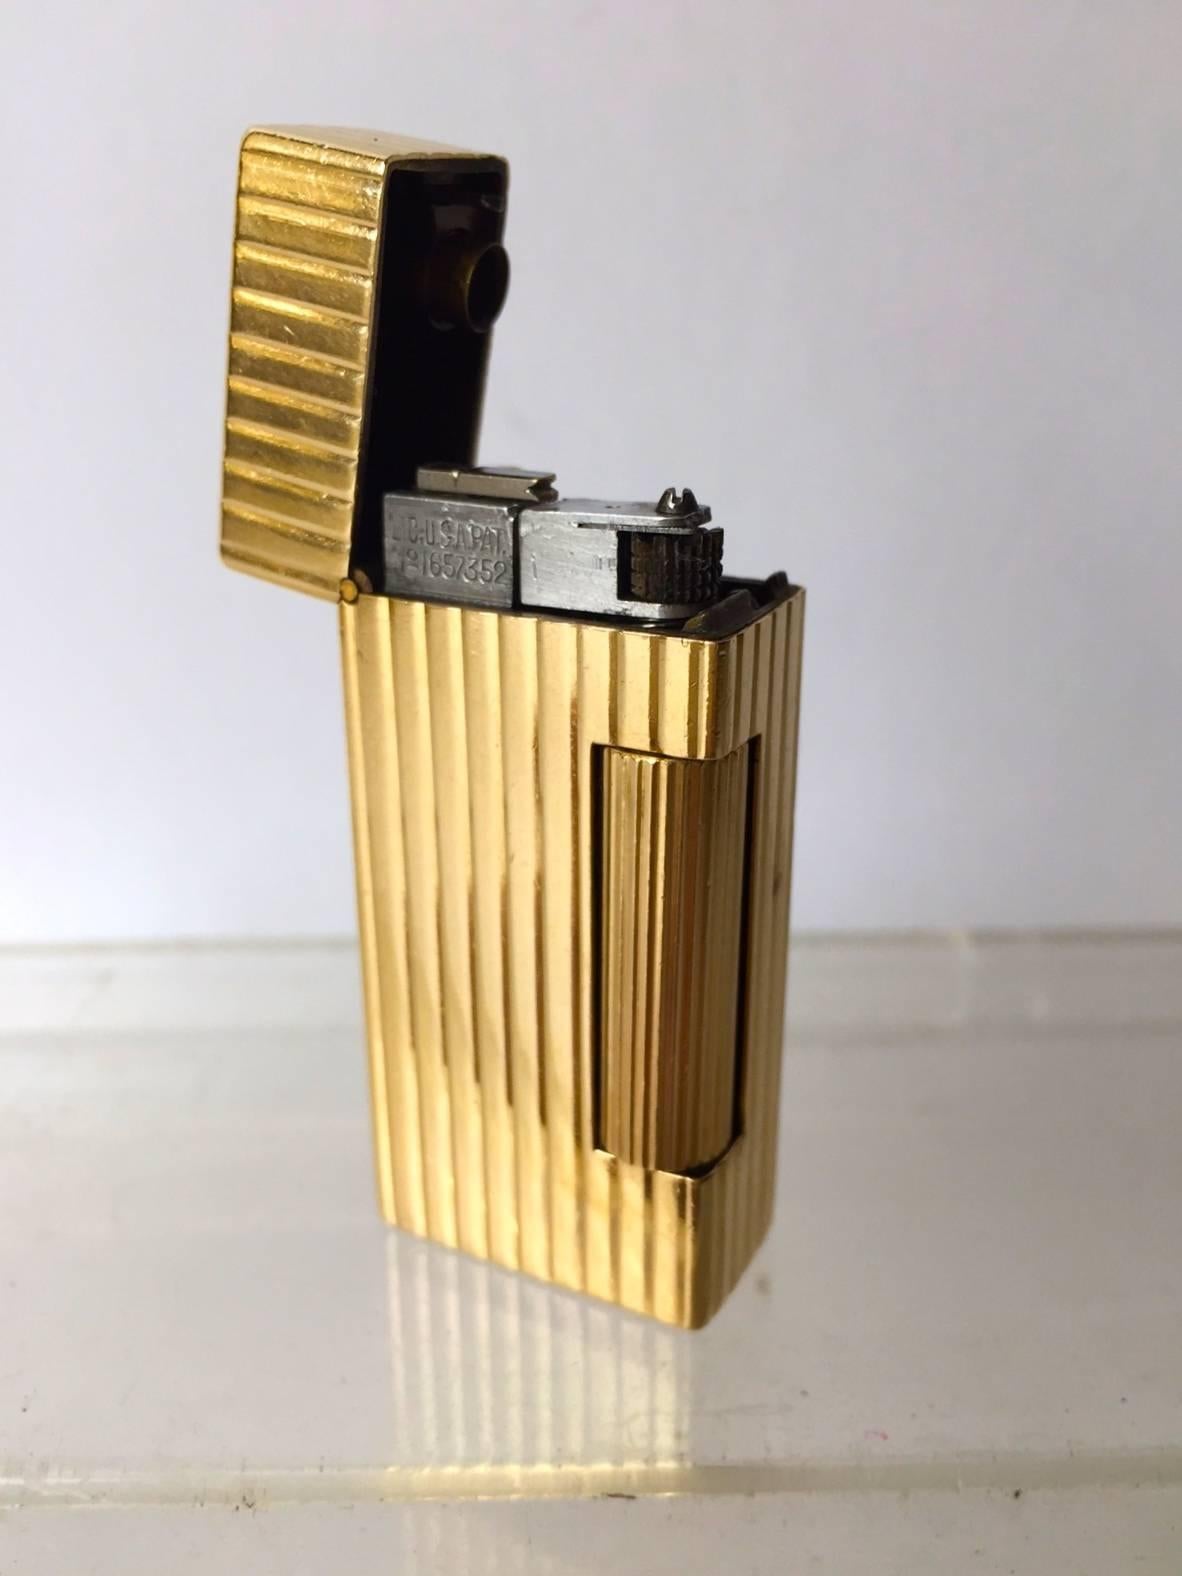 This lighter is in fantastic condition, lid functions as new, opens with the turn of the roller bar, lid pops open and the lighter ignites, very cool. The lighter has not been monogrammed a plus. The lighter is a vintage fluid model. The flint